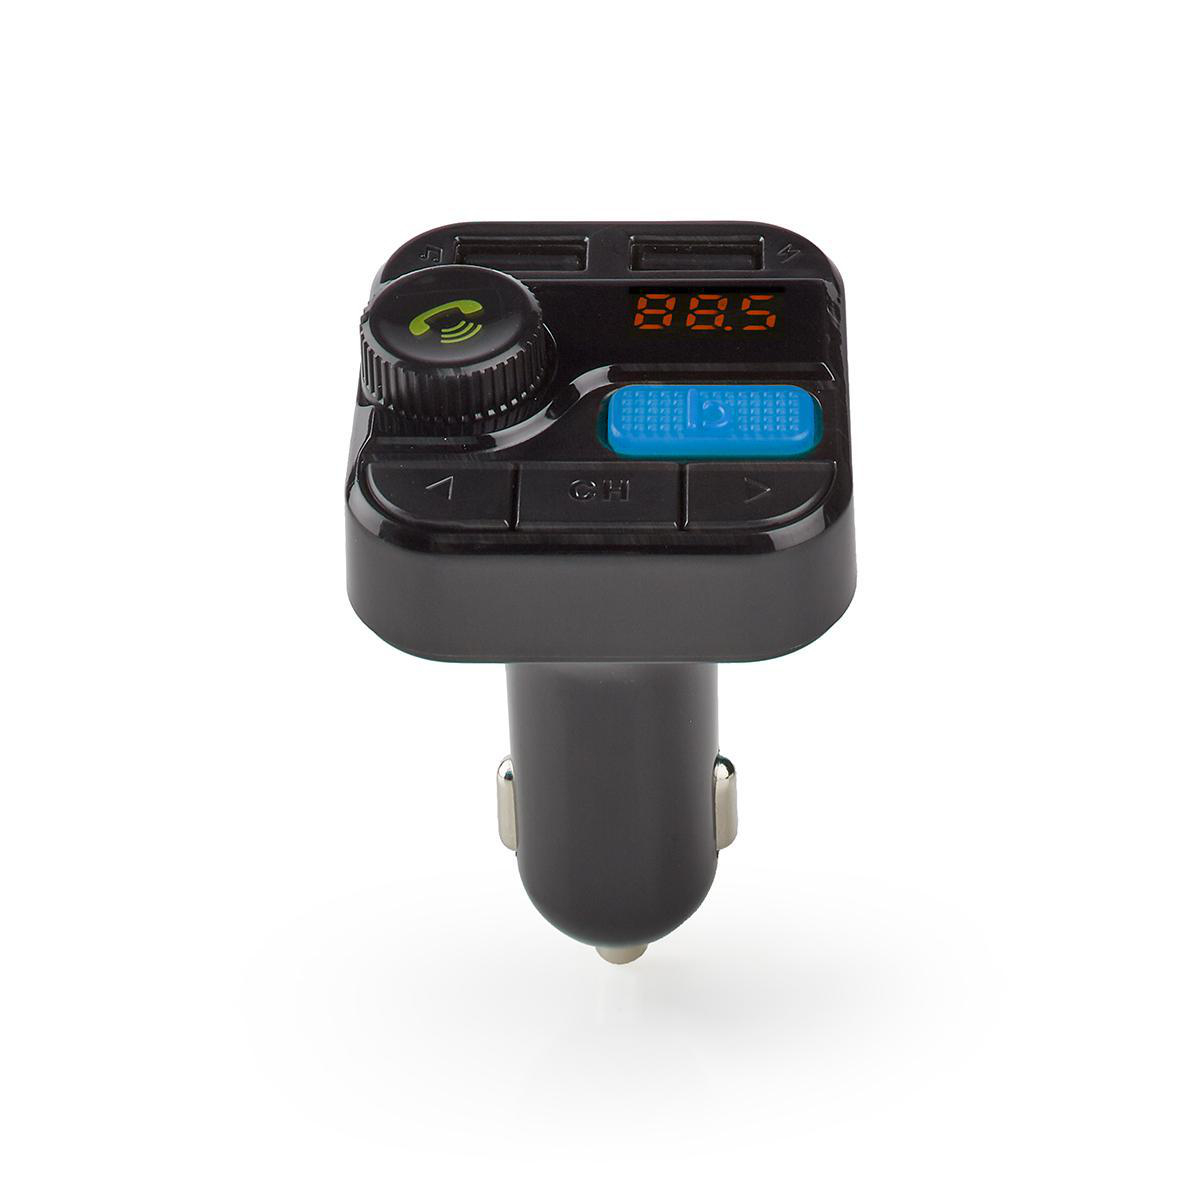 Auto Drive AA00277W Car FM Transmitter Black - Retails For 29.99